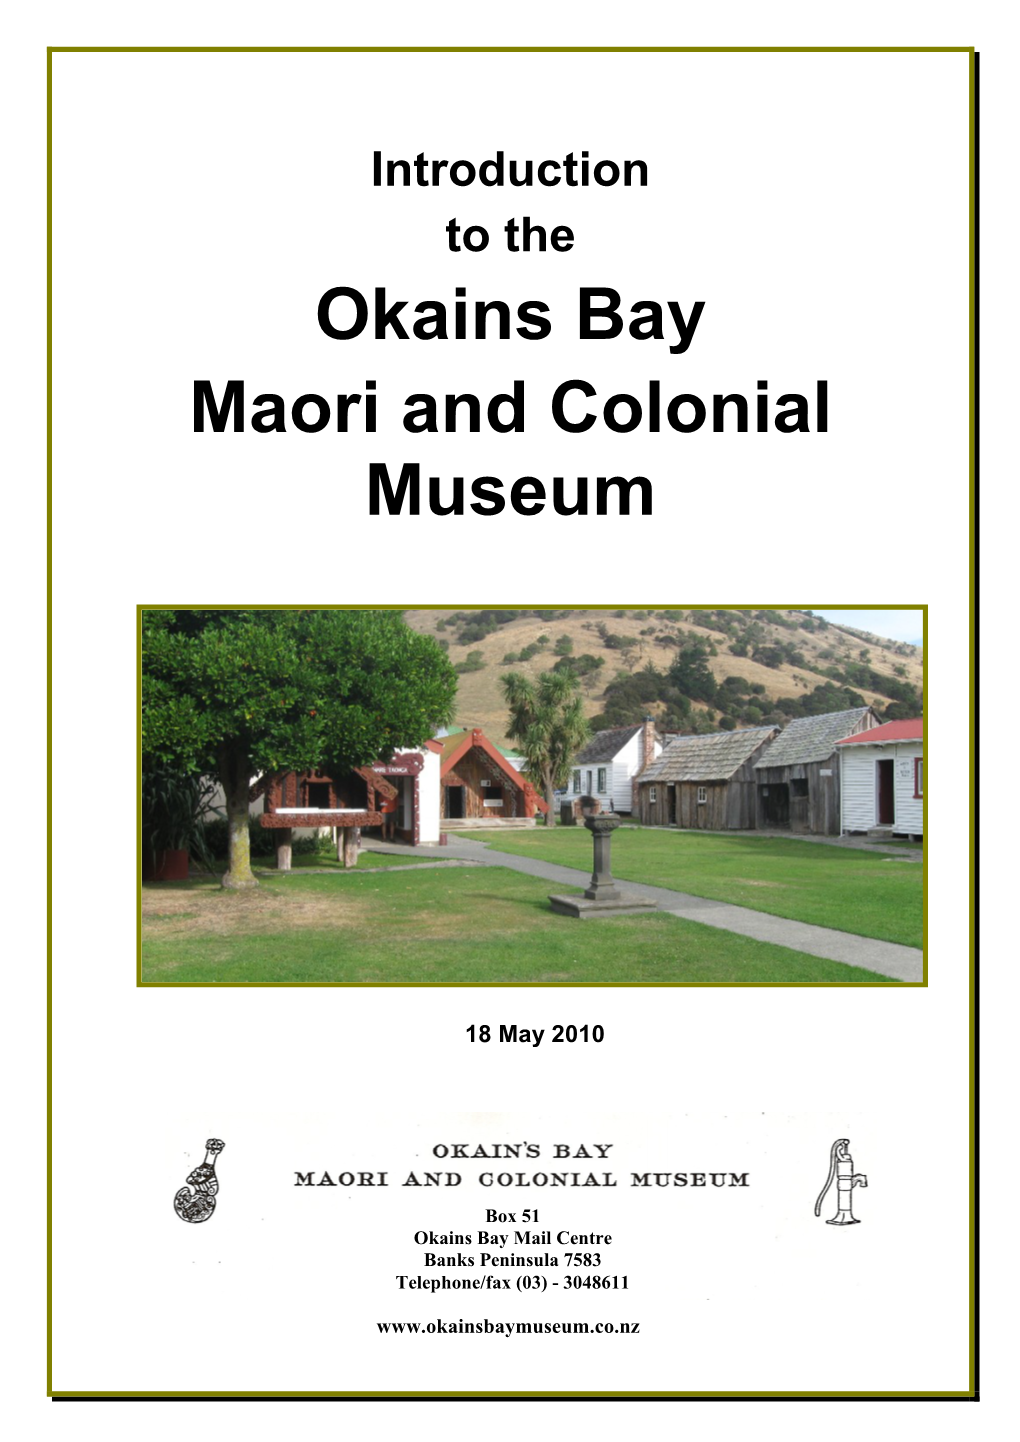 Introduction to the Okains Bay Maori and Colonial Museum